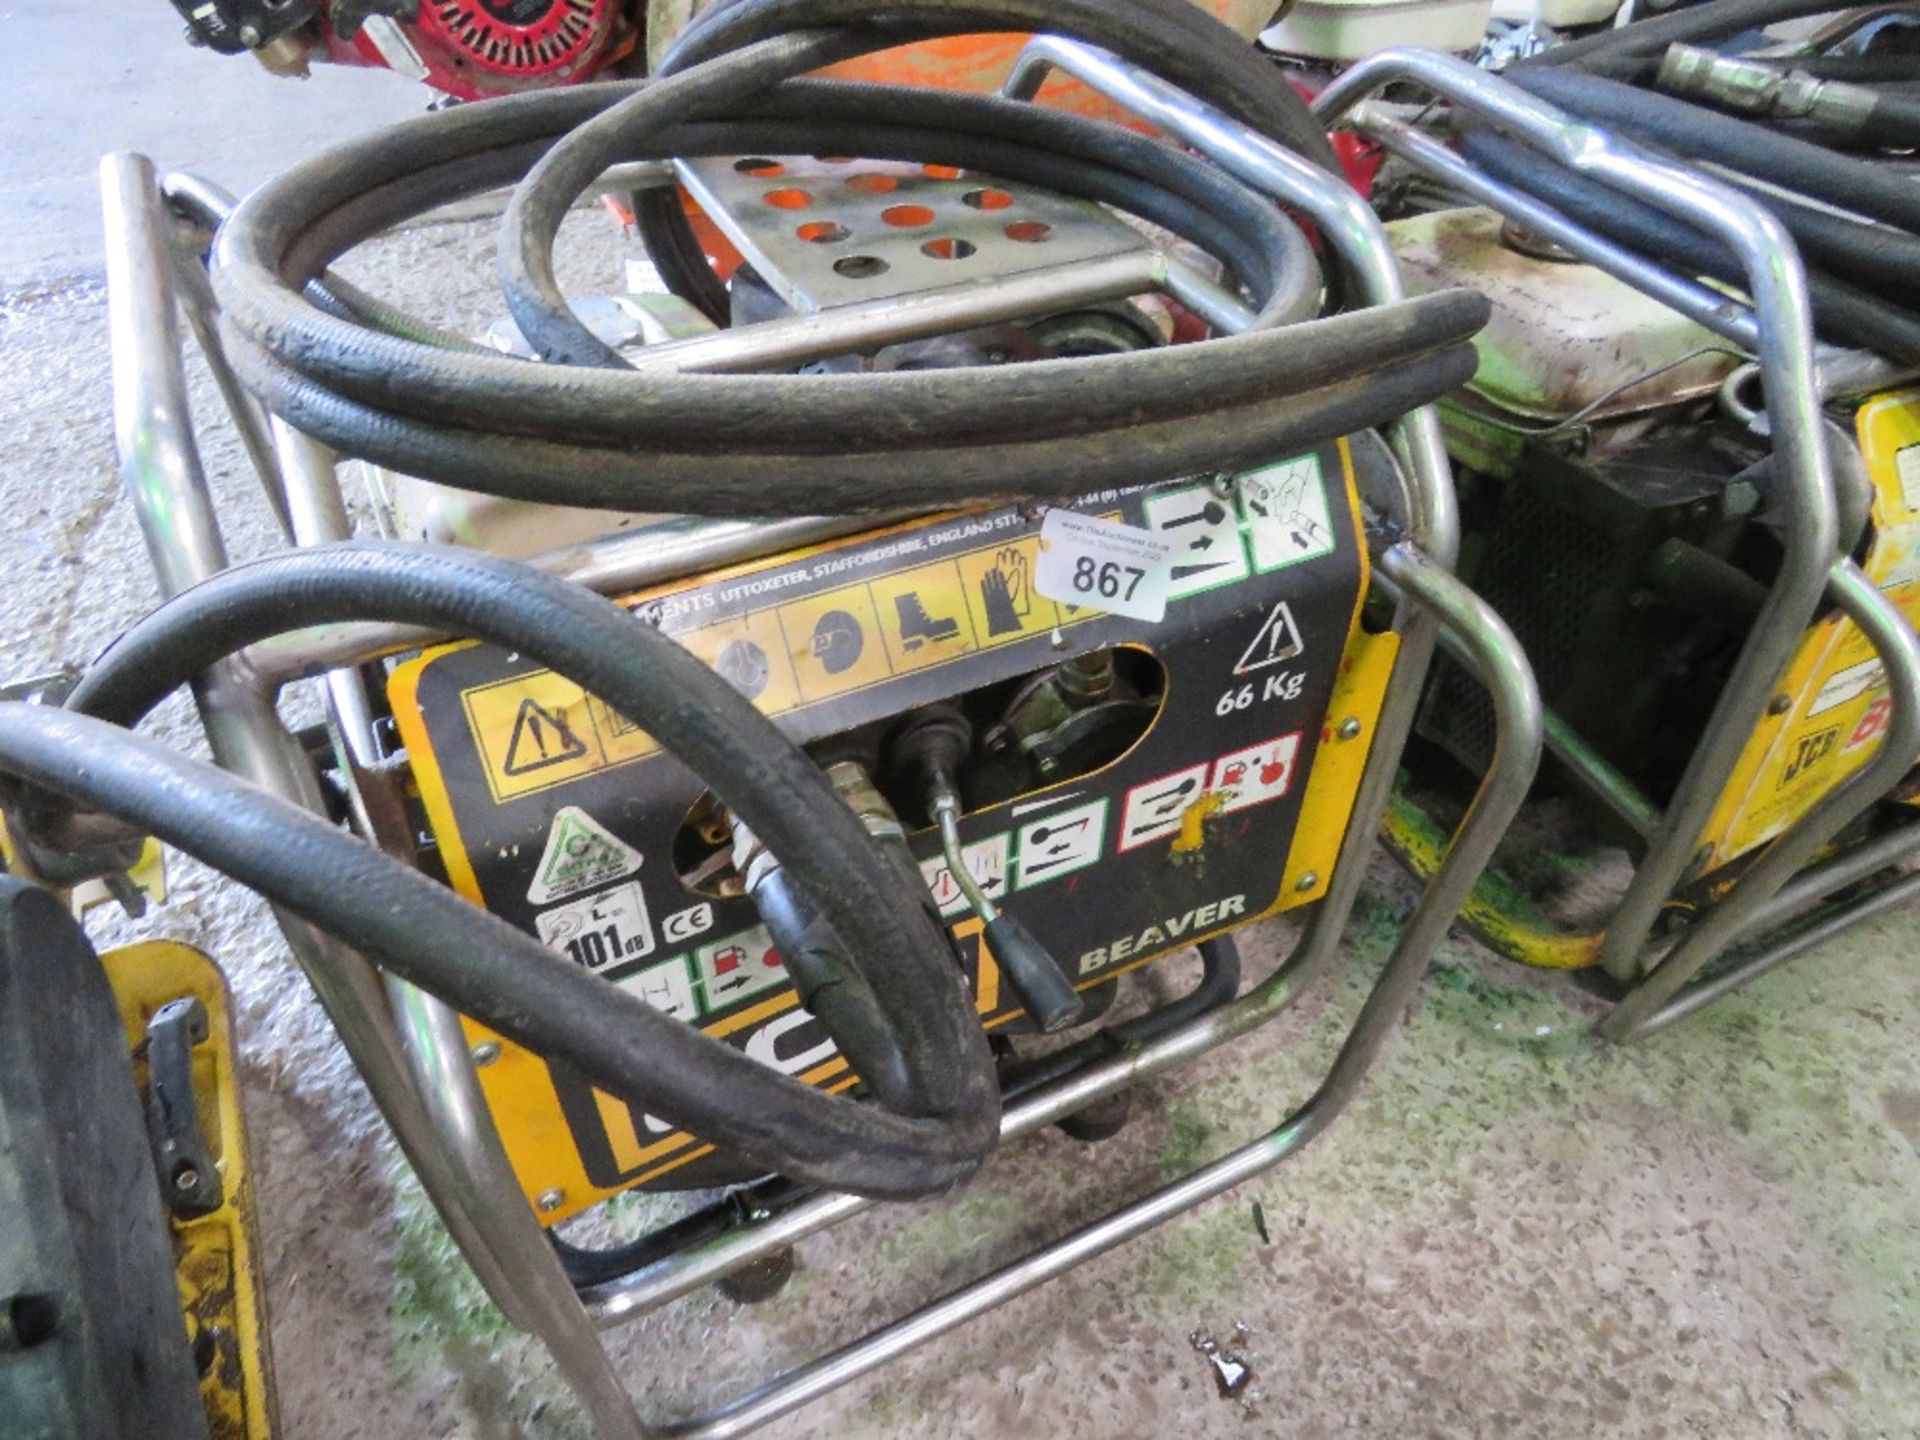 JCB BEAVER BREAKER PACK WITH HOSE BUT NO GUN, YEAR 2017 BUILD. WHEN TESTED: TURNS OVER NOT STARTING